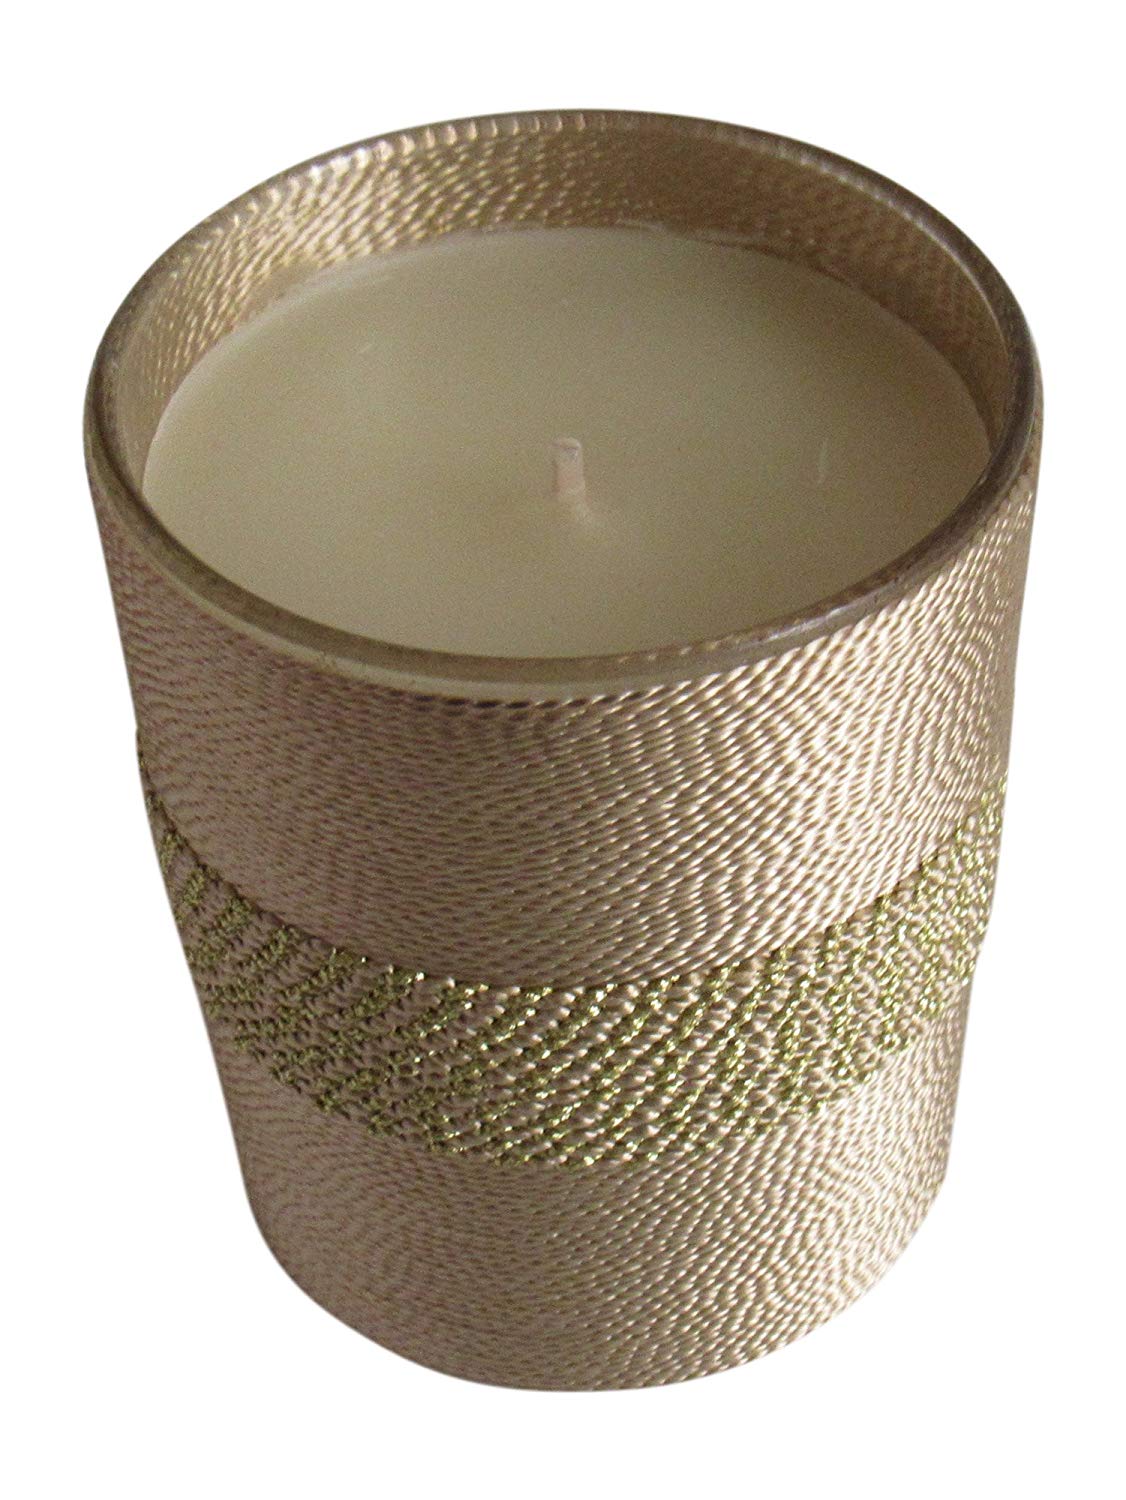 F Moroccan Scented Candle, Fresh Fig Blossoms and Herbs 6 oz - Marrakesh Gardens